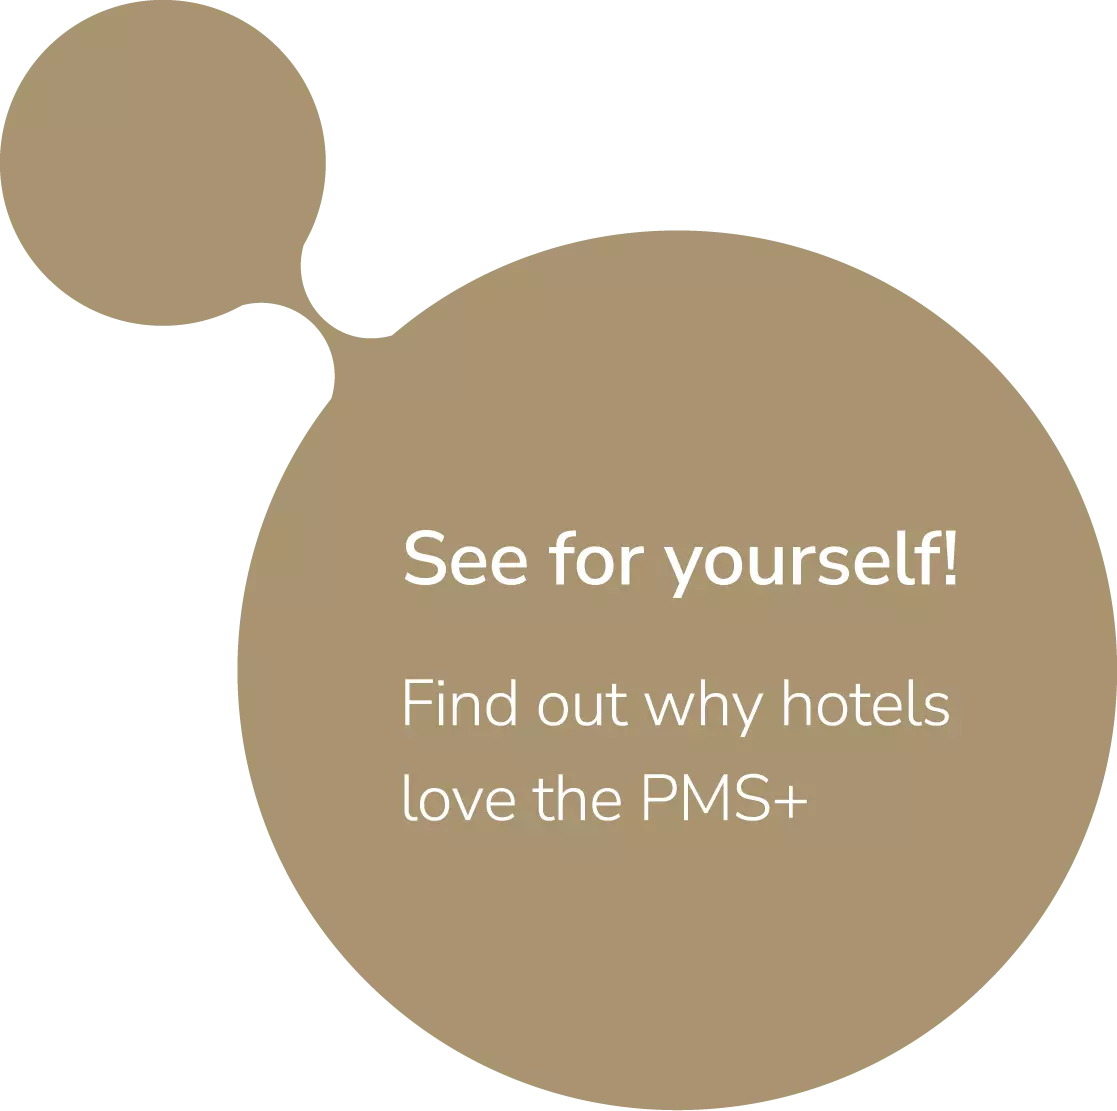 See for yourself! Find out why hotels love the PMS+